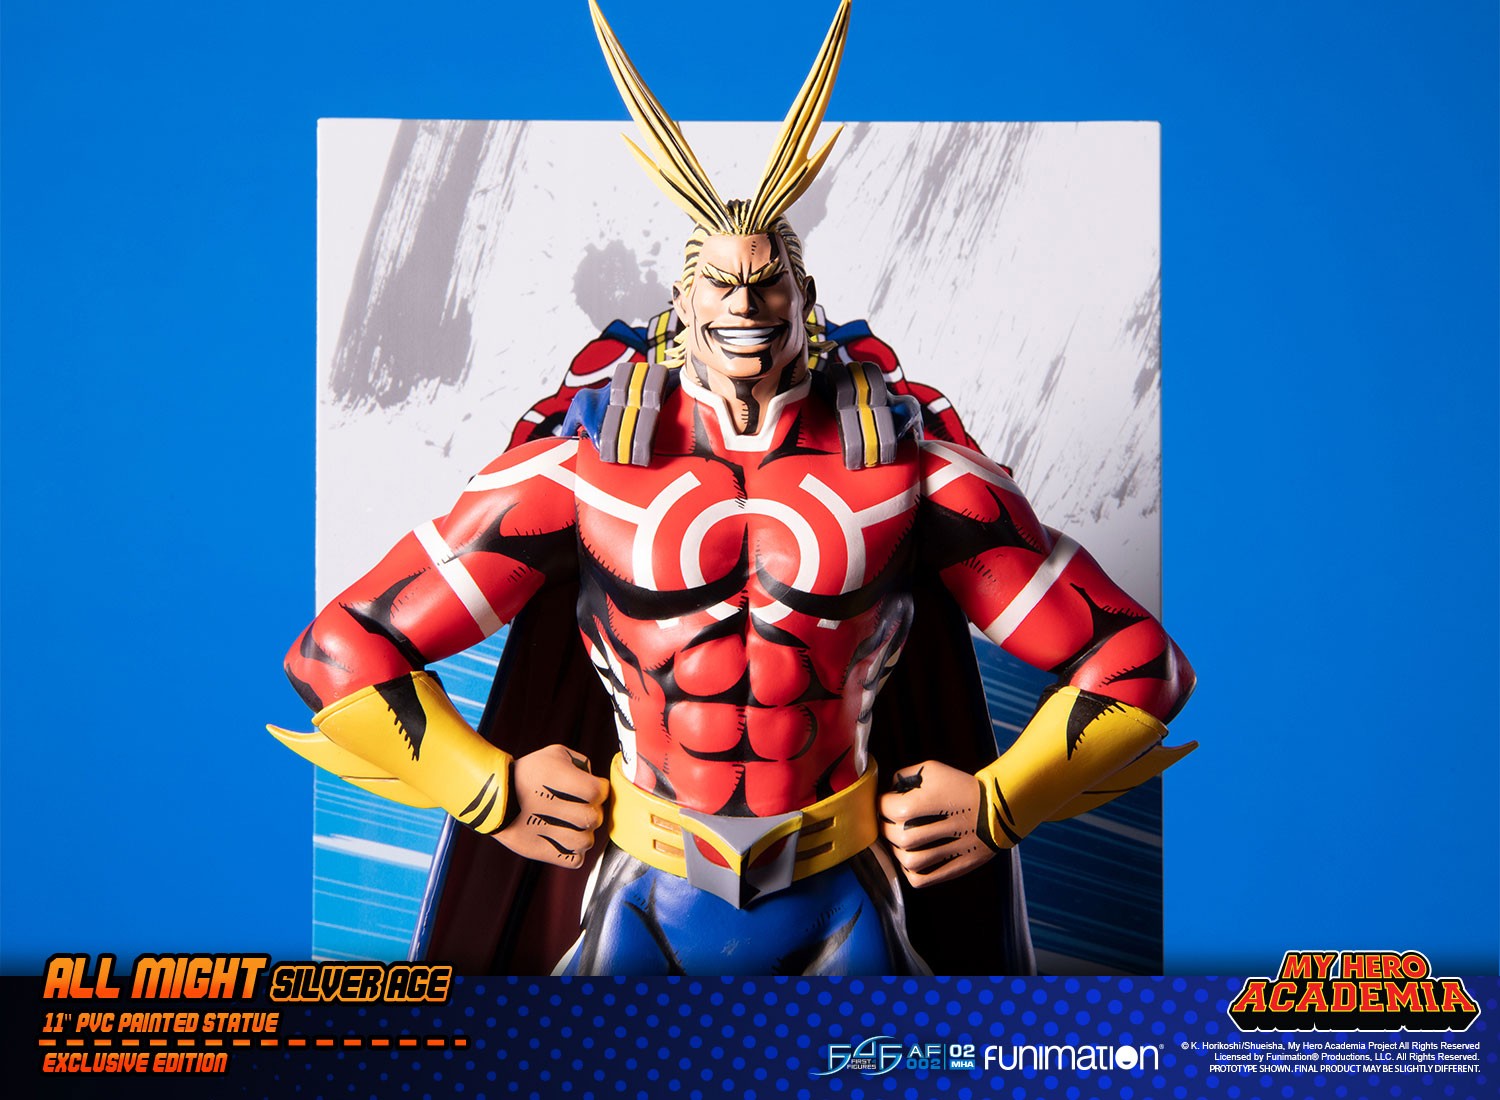 FAST SHIPPING!! All Might My Hero Academia 